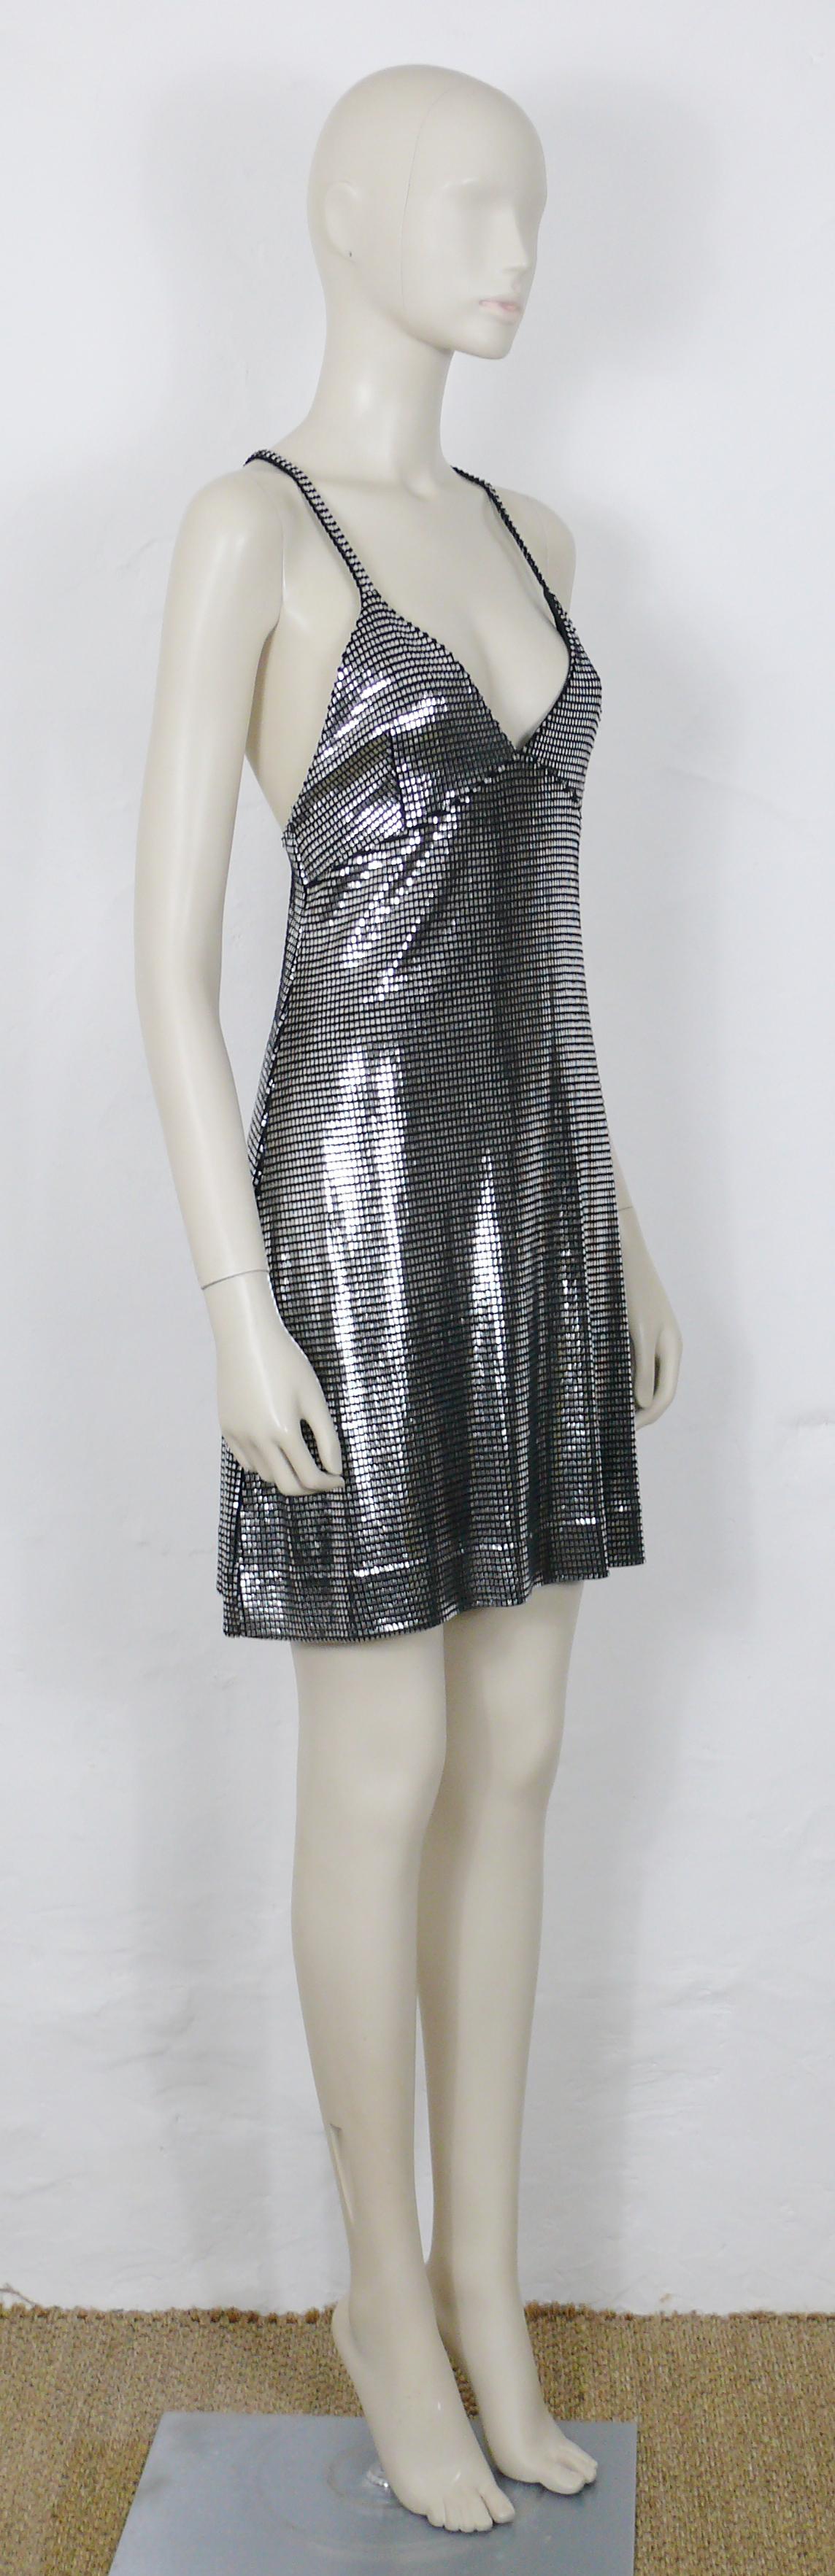 PACO RABANNE silver foil grid mini dress.

Top surface is silver foil printed creating a metallic chain mail effect on a black knit spandex base.

Cross back shoulder straps.

Label reads PACO RABANNE Paris.
Made in France.

Size tag reads :